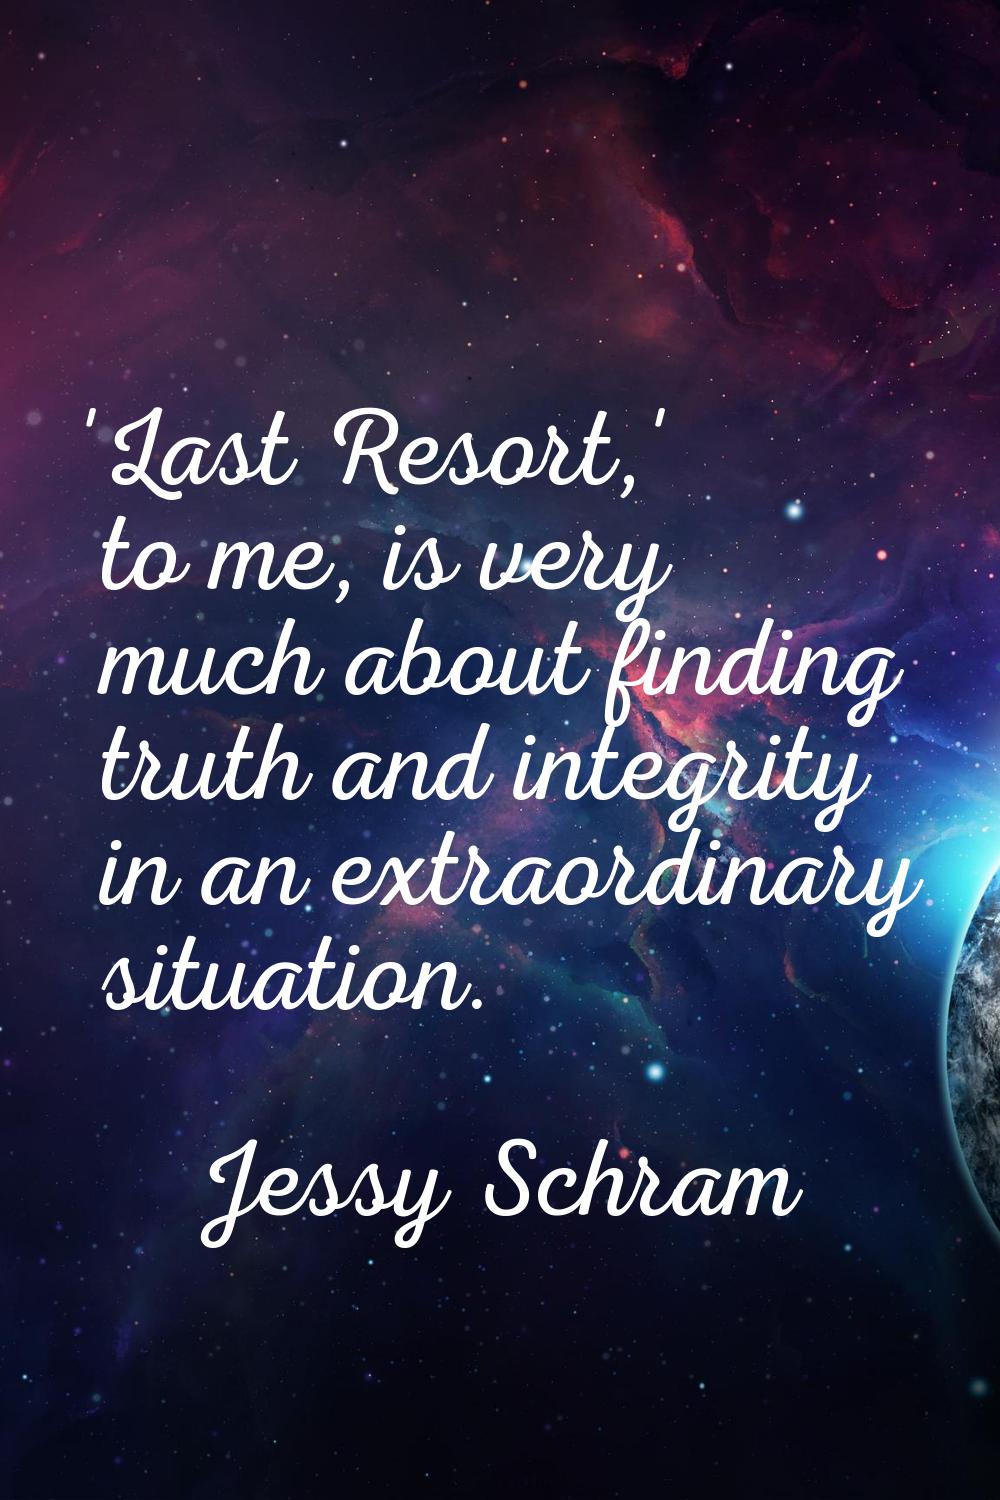 'Last Resort,' to me, is very much about finding truth and integrity in an extraordinary situation.